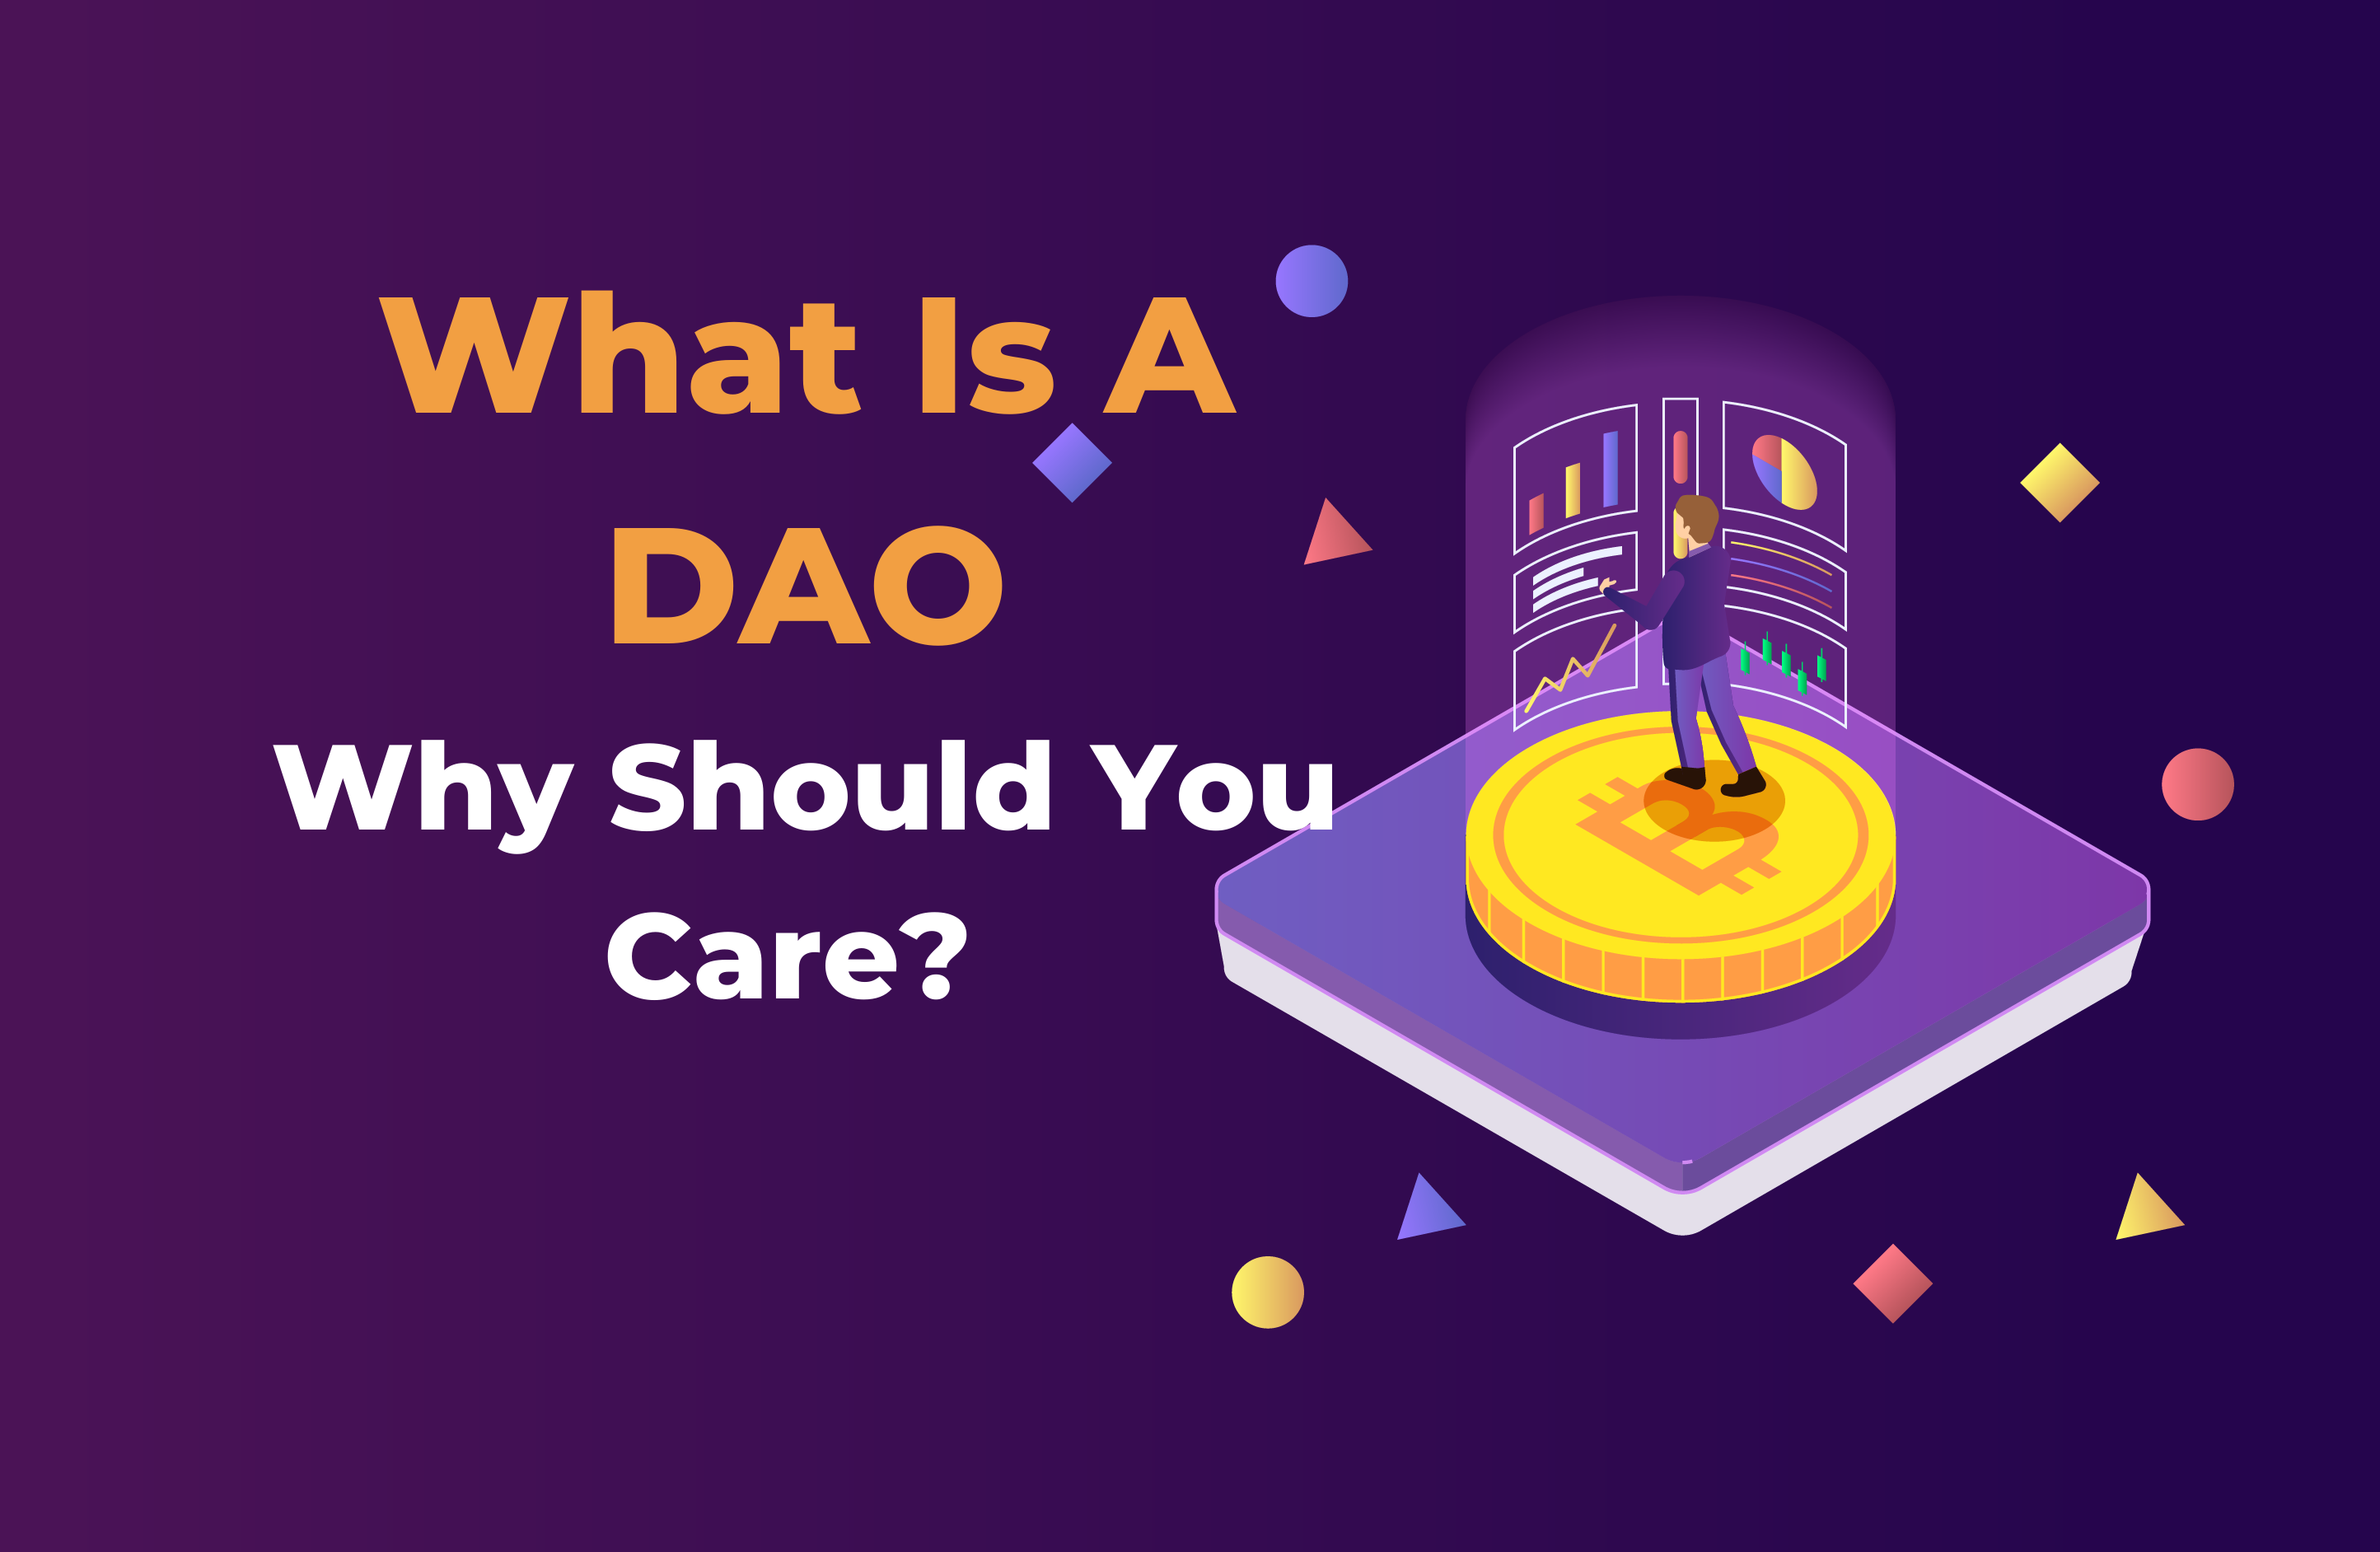 What is A DAO